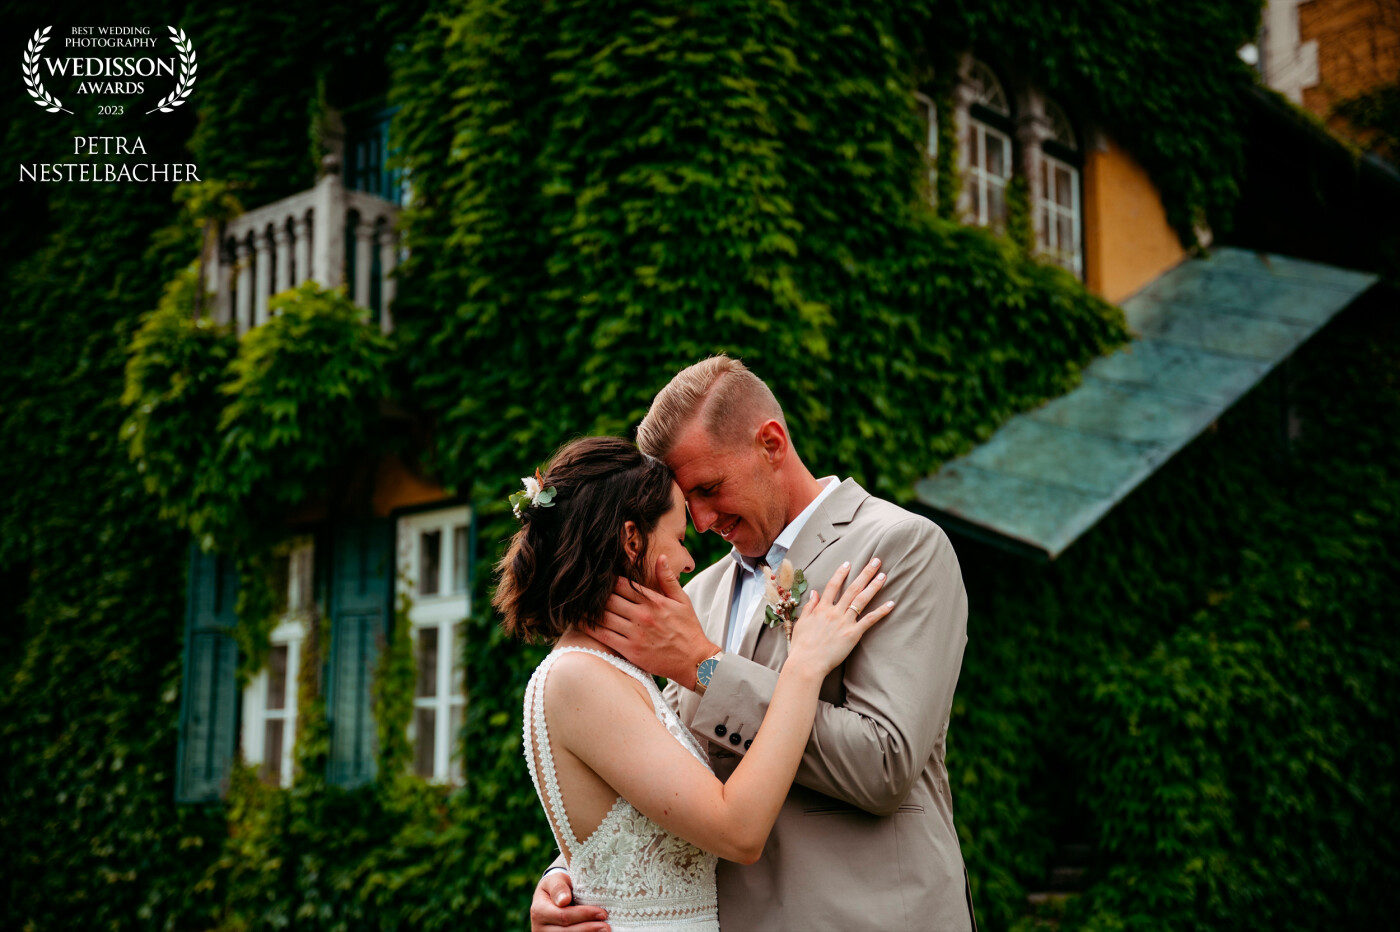 The castle of Velden, located at the picturesque shores of Lake Woerth in Carinthia (Austria) is a fairytale place for a marriage. Historical ambiance mixed with modern architecture offer so many stunning places for unforgettable wedding pictures!